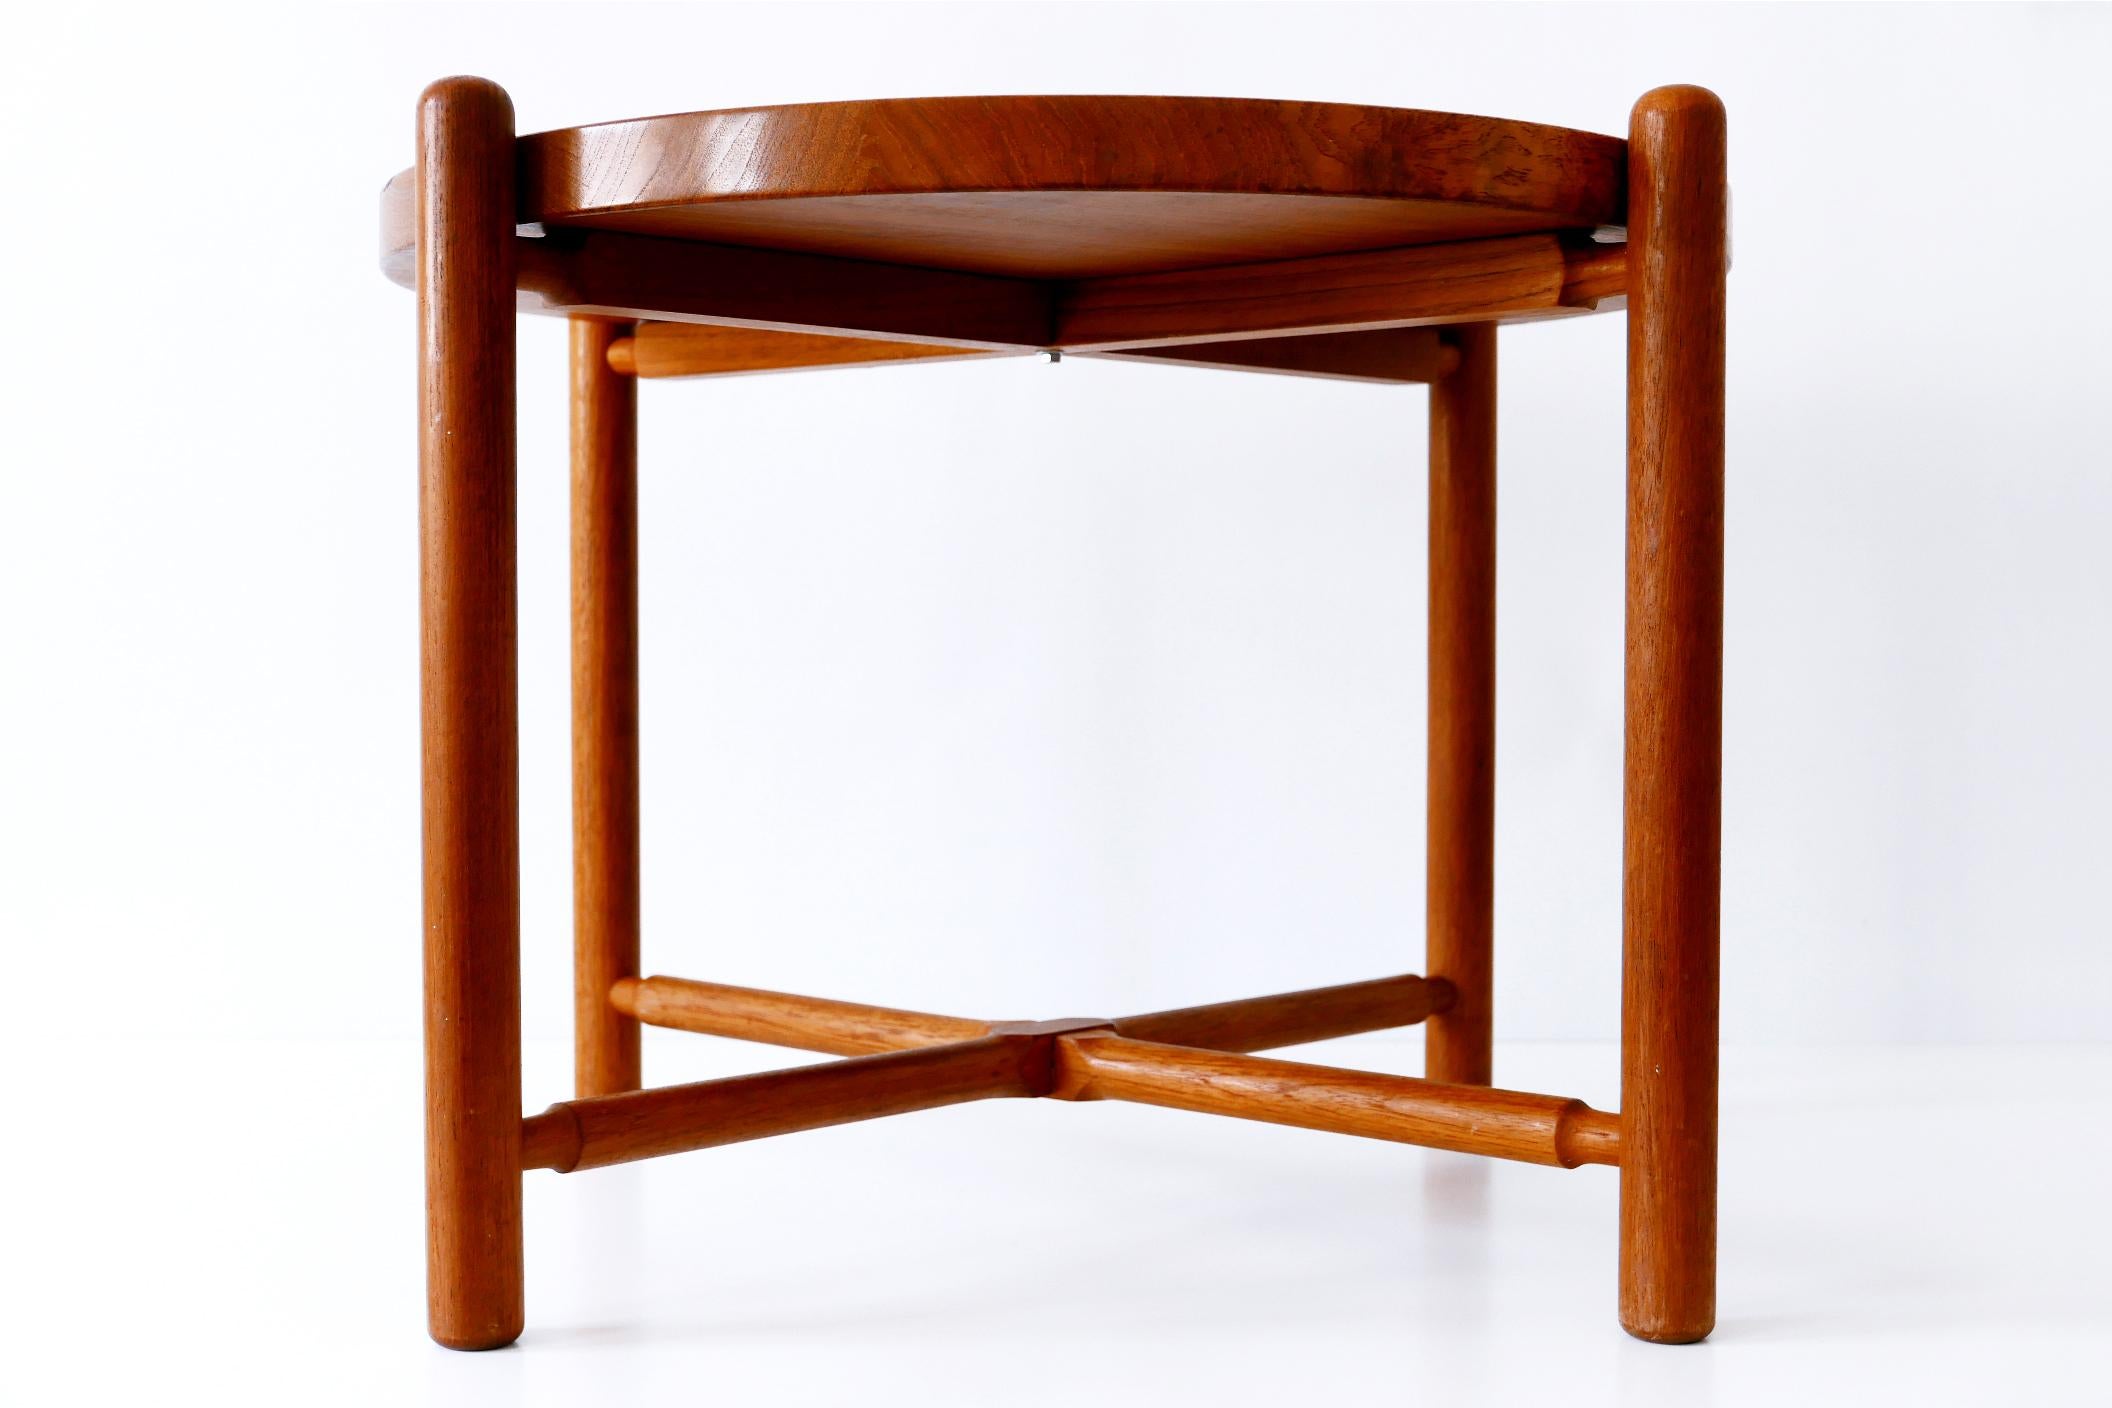 Rare Mid-Century Modern folding coffee table with massiv teak tray and base. The table top with a delicate lip sits loose on the base which is foldable. 

At first sight it seems to be similar to the folding table AT-35 of Hans J. Wegner. But